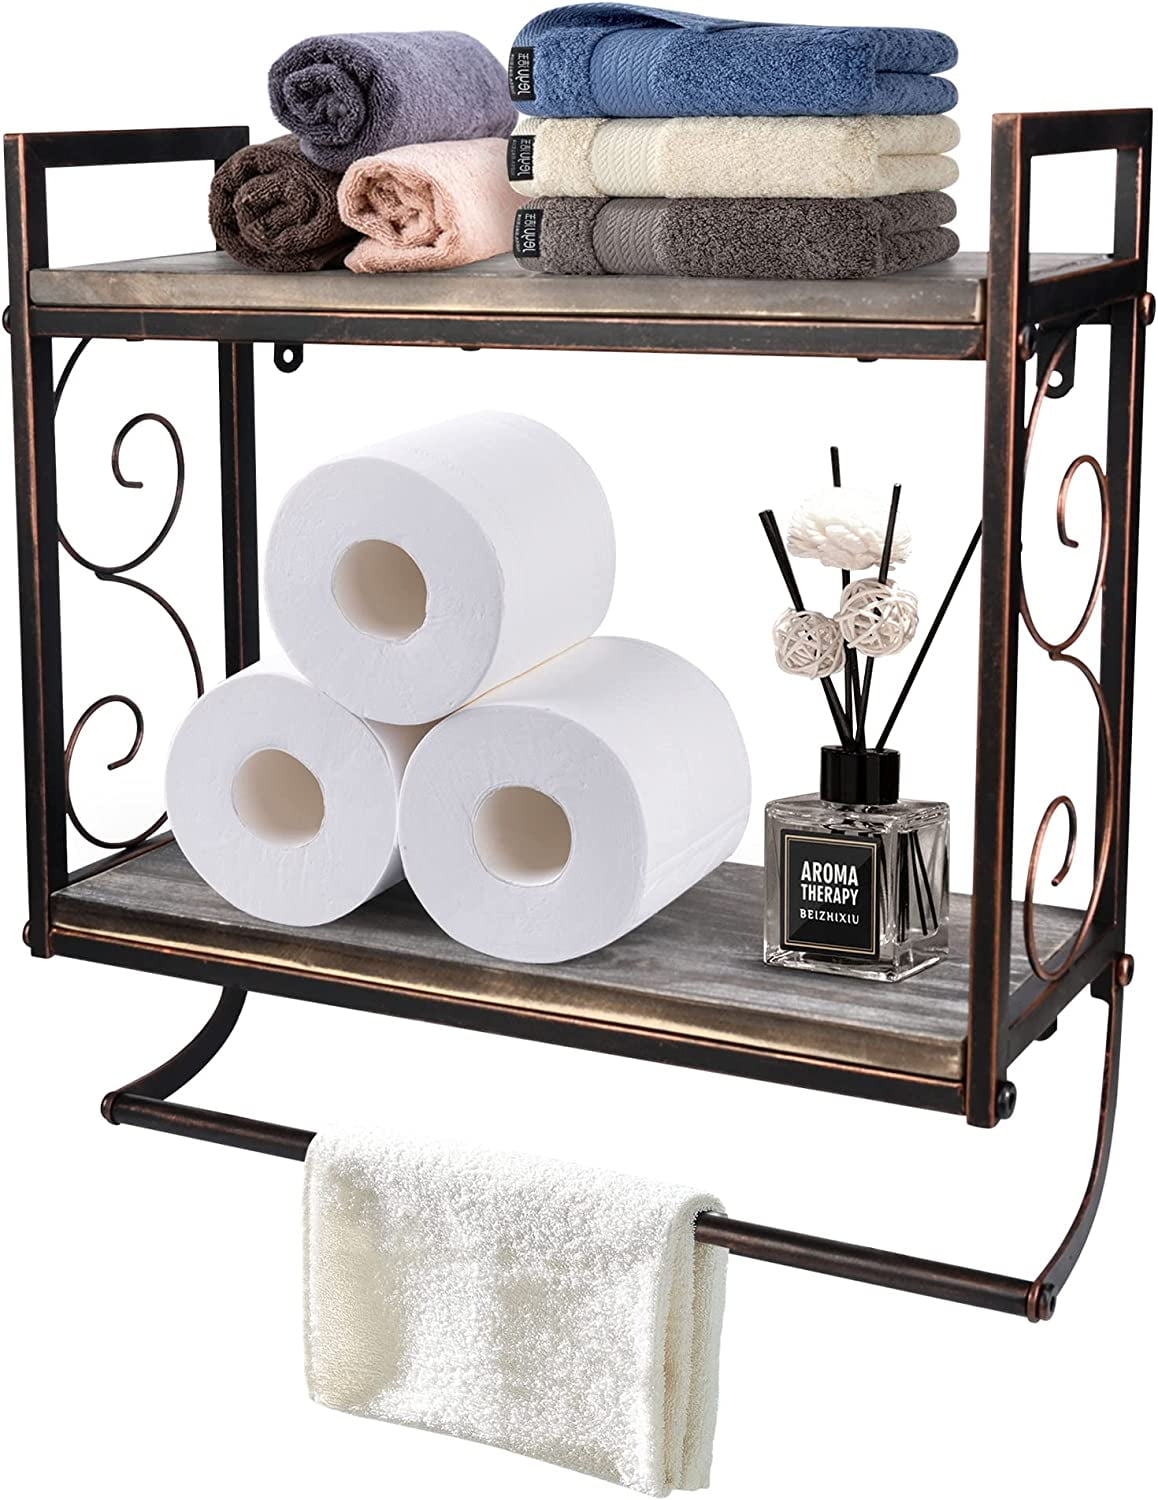 LOKO 2-Tier Bathroom Towel Rack with Shelf, Industrial Over The Toilet  Shelf with Towel Bar, Wall Mounted Hanging Shelf with Towel Holder, Rustic Storage  Organizer Shelves for Living Room, Kitchen - Yahoo